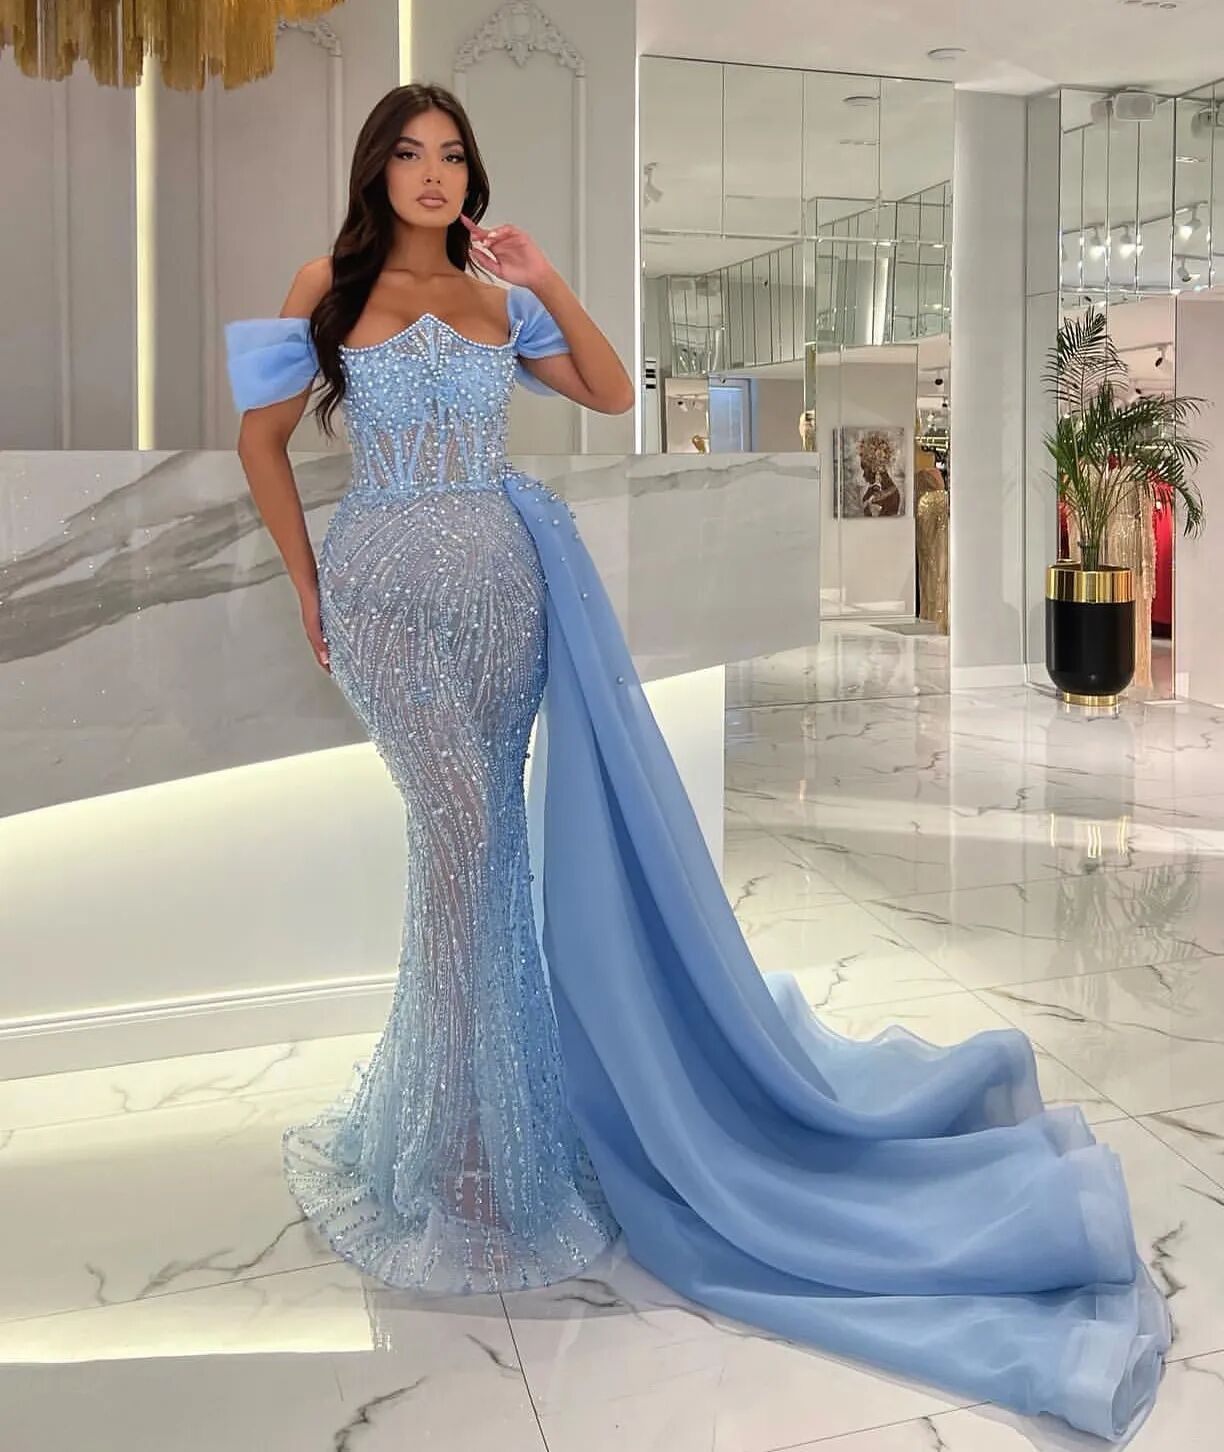 Luxury Pearls Mermaid Evening Dresses Off Shoulder Prom Dress Detachable Train Sequined Beaded Formal Party Dress for Special Occasion